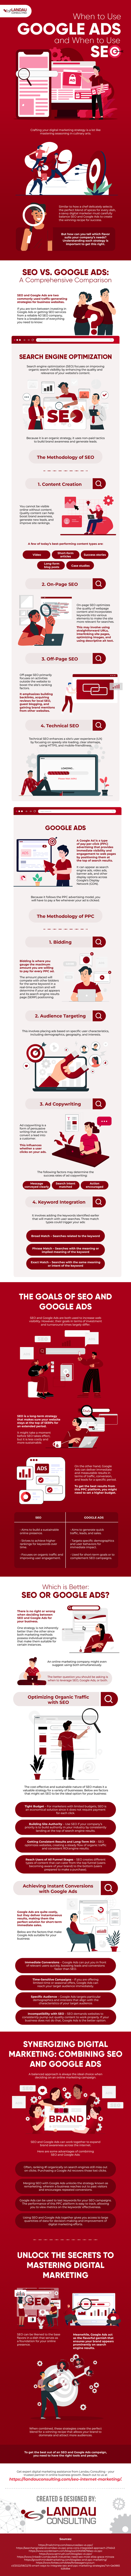 When to Use Google Ads and When to Use SEO Infographic image 03